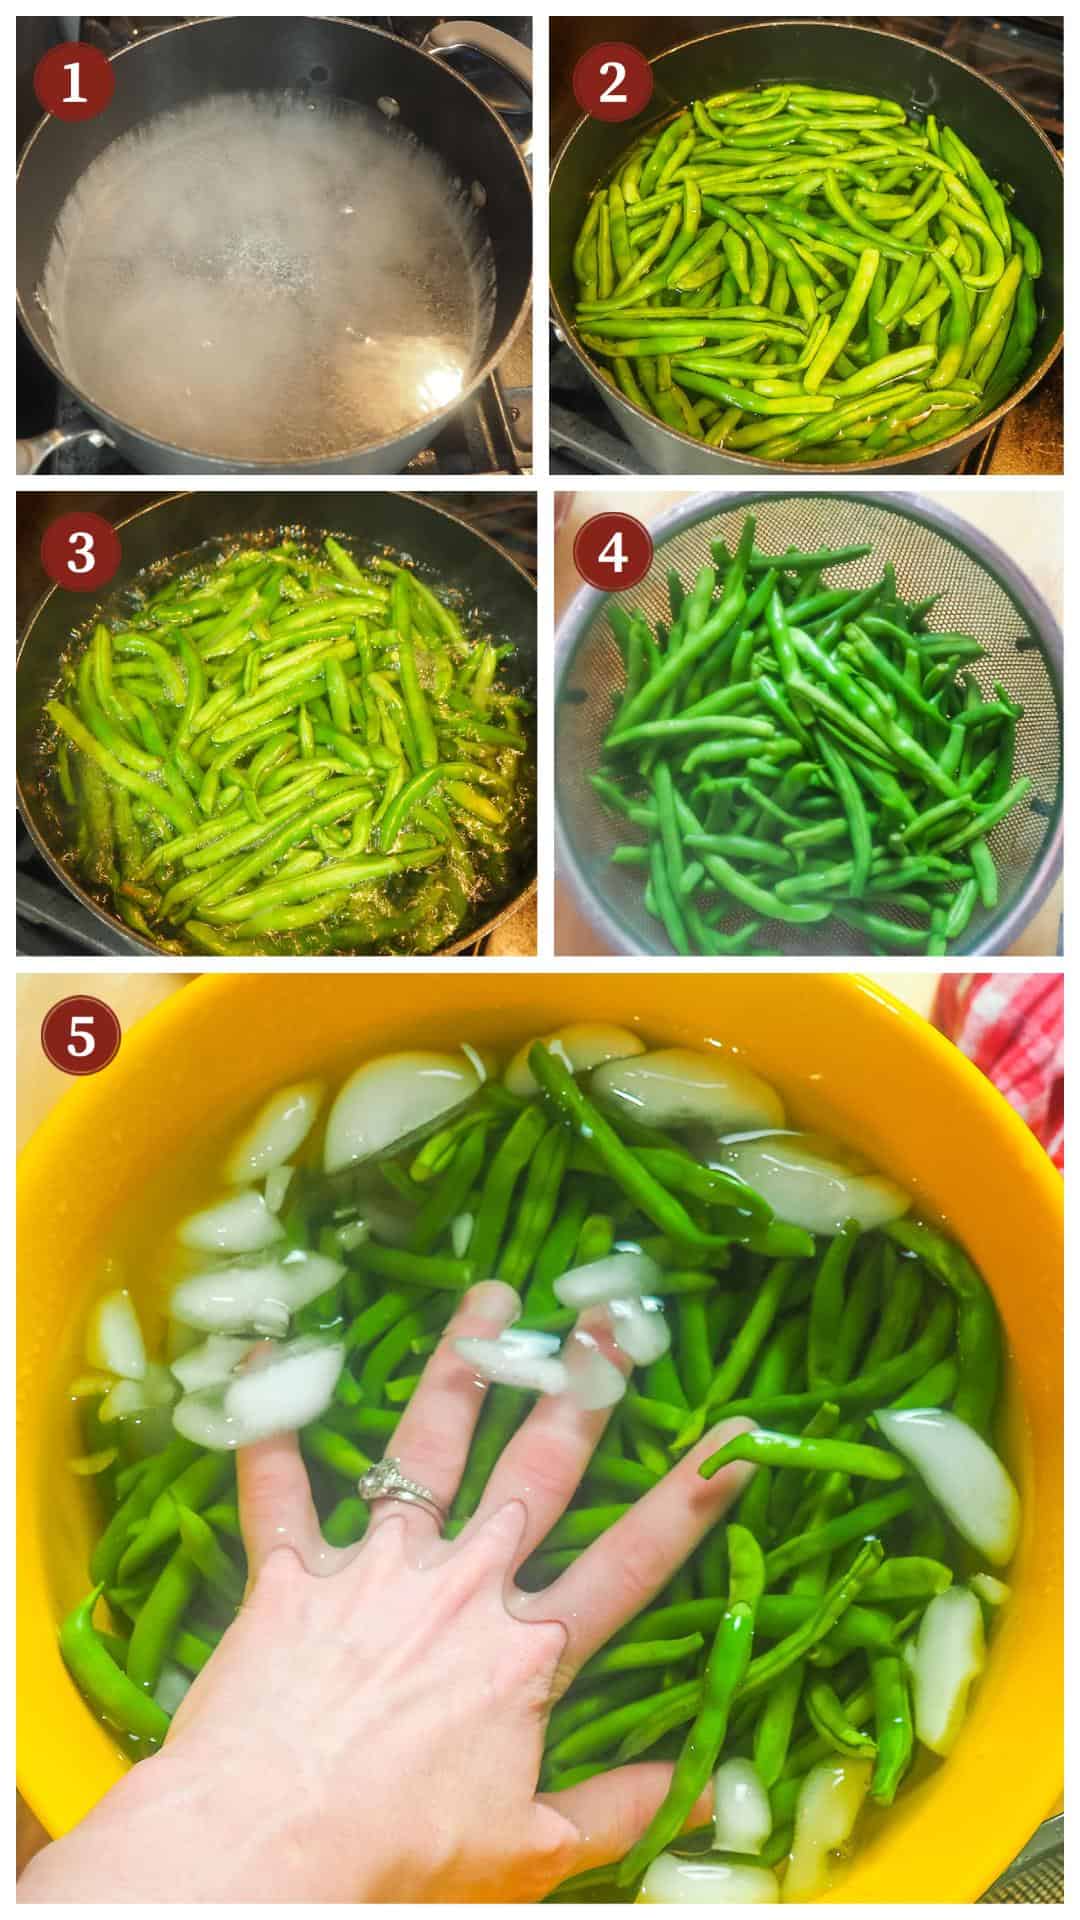 A collage of images showing how to blanch green beans.